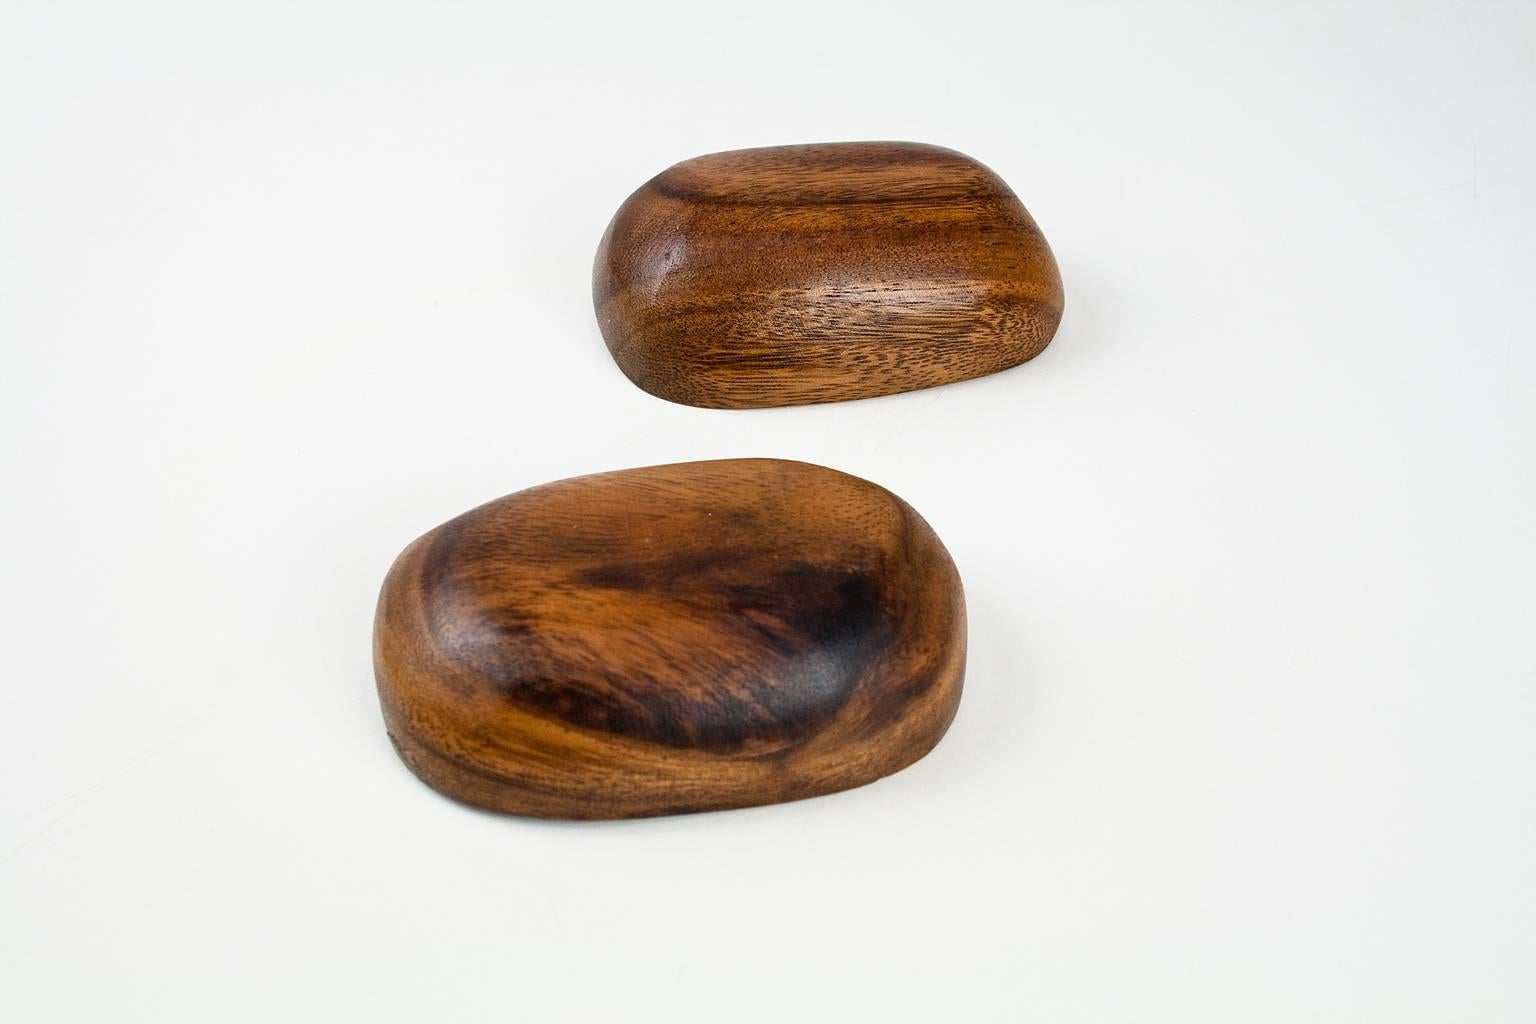 Hand-Crafted 1960s Small Handcrafted Sculptured Danish Teak Storage or Desk Accessory Bowls